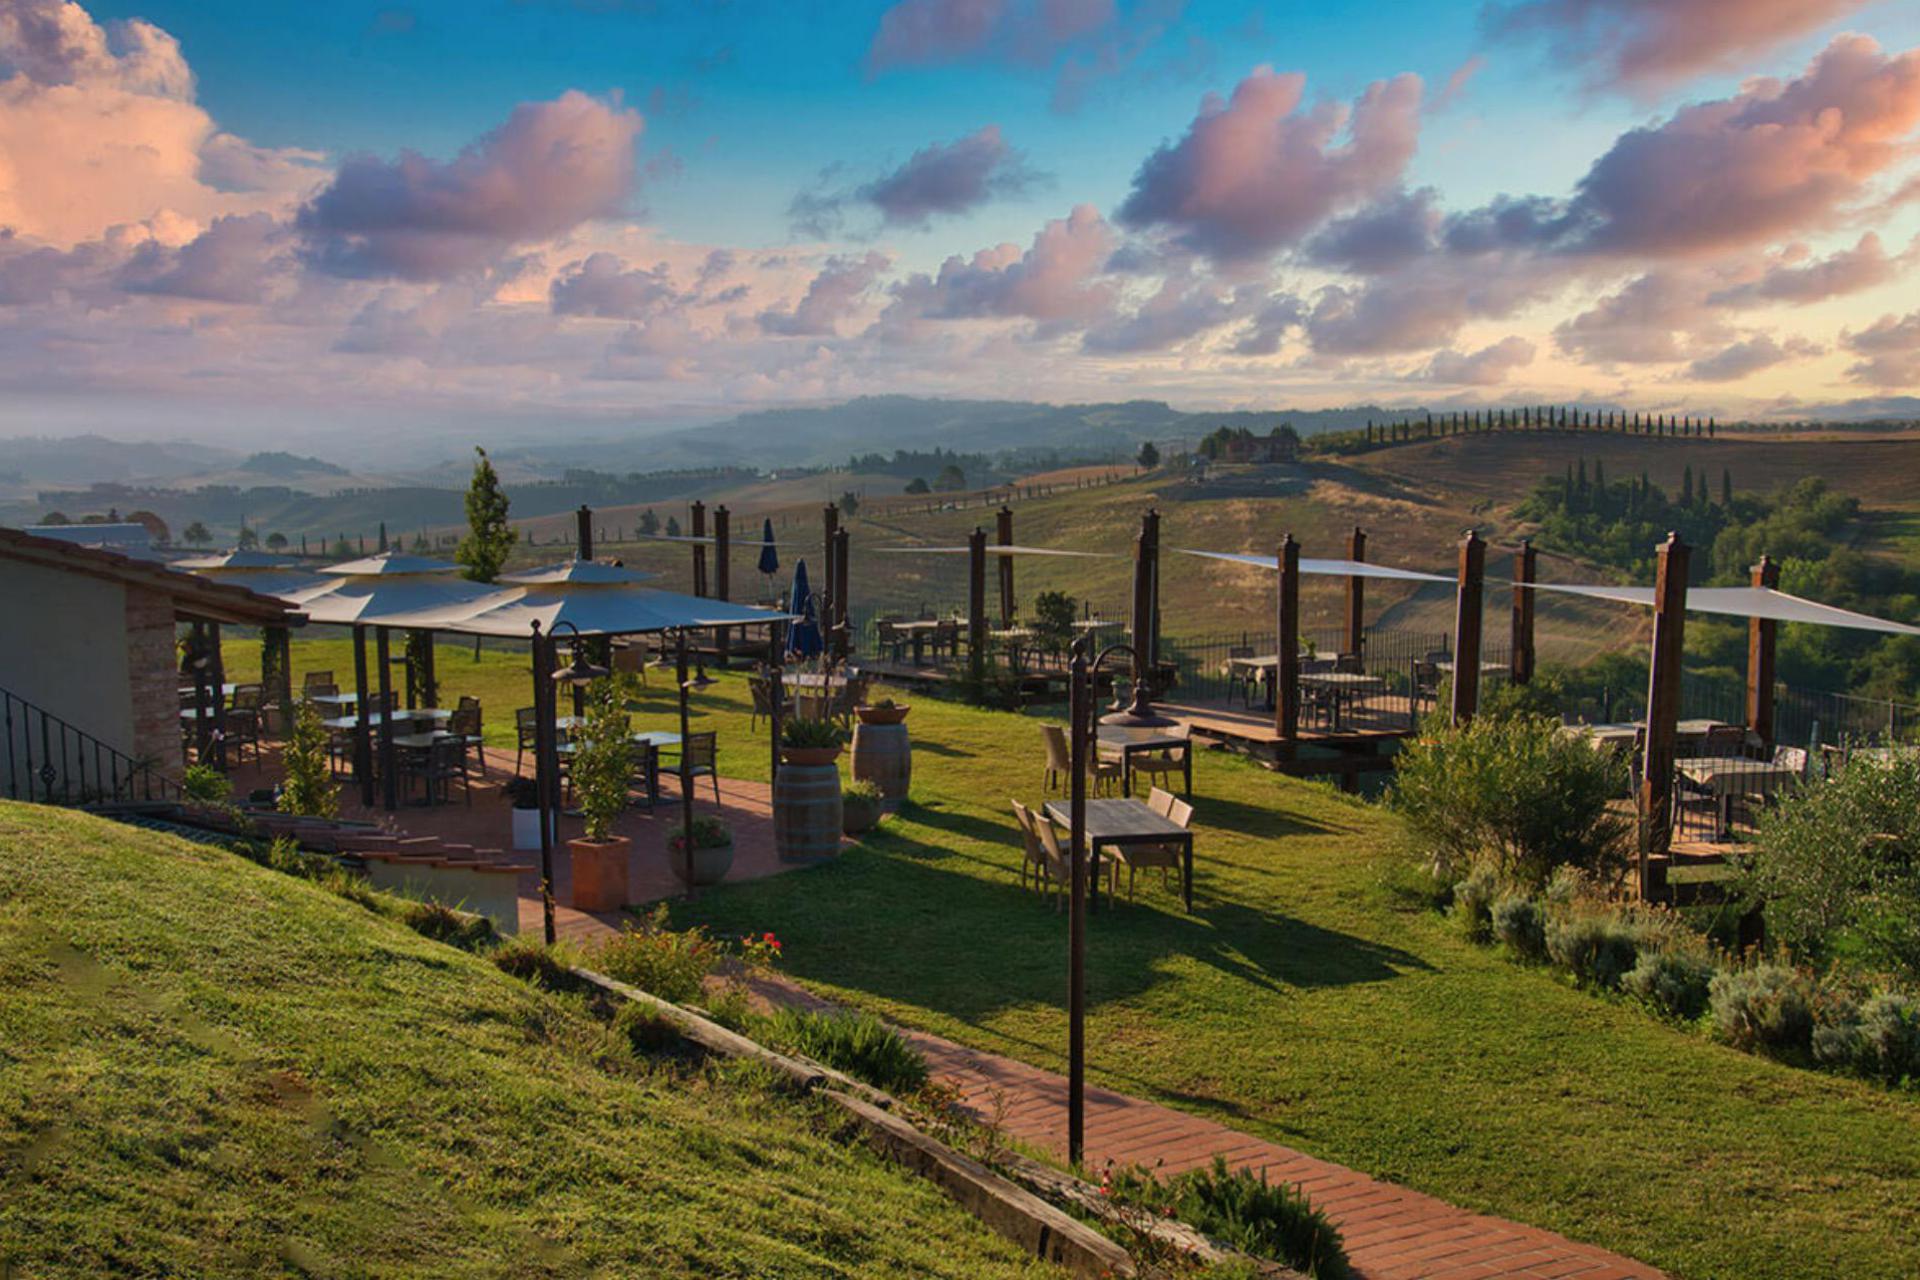 Agriturismo Tuscany, kid friendly and super welcoming!